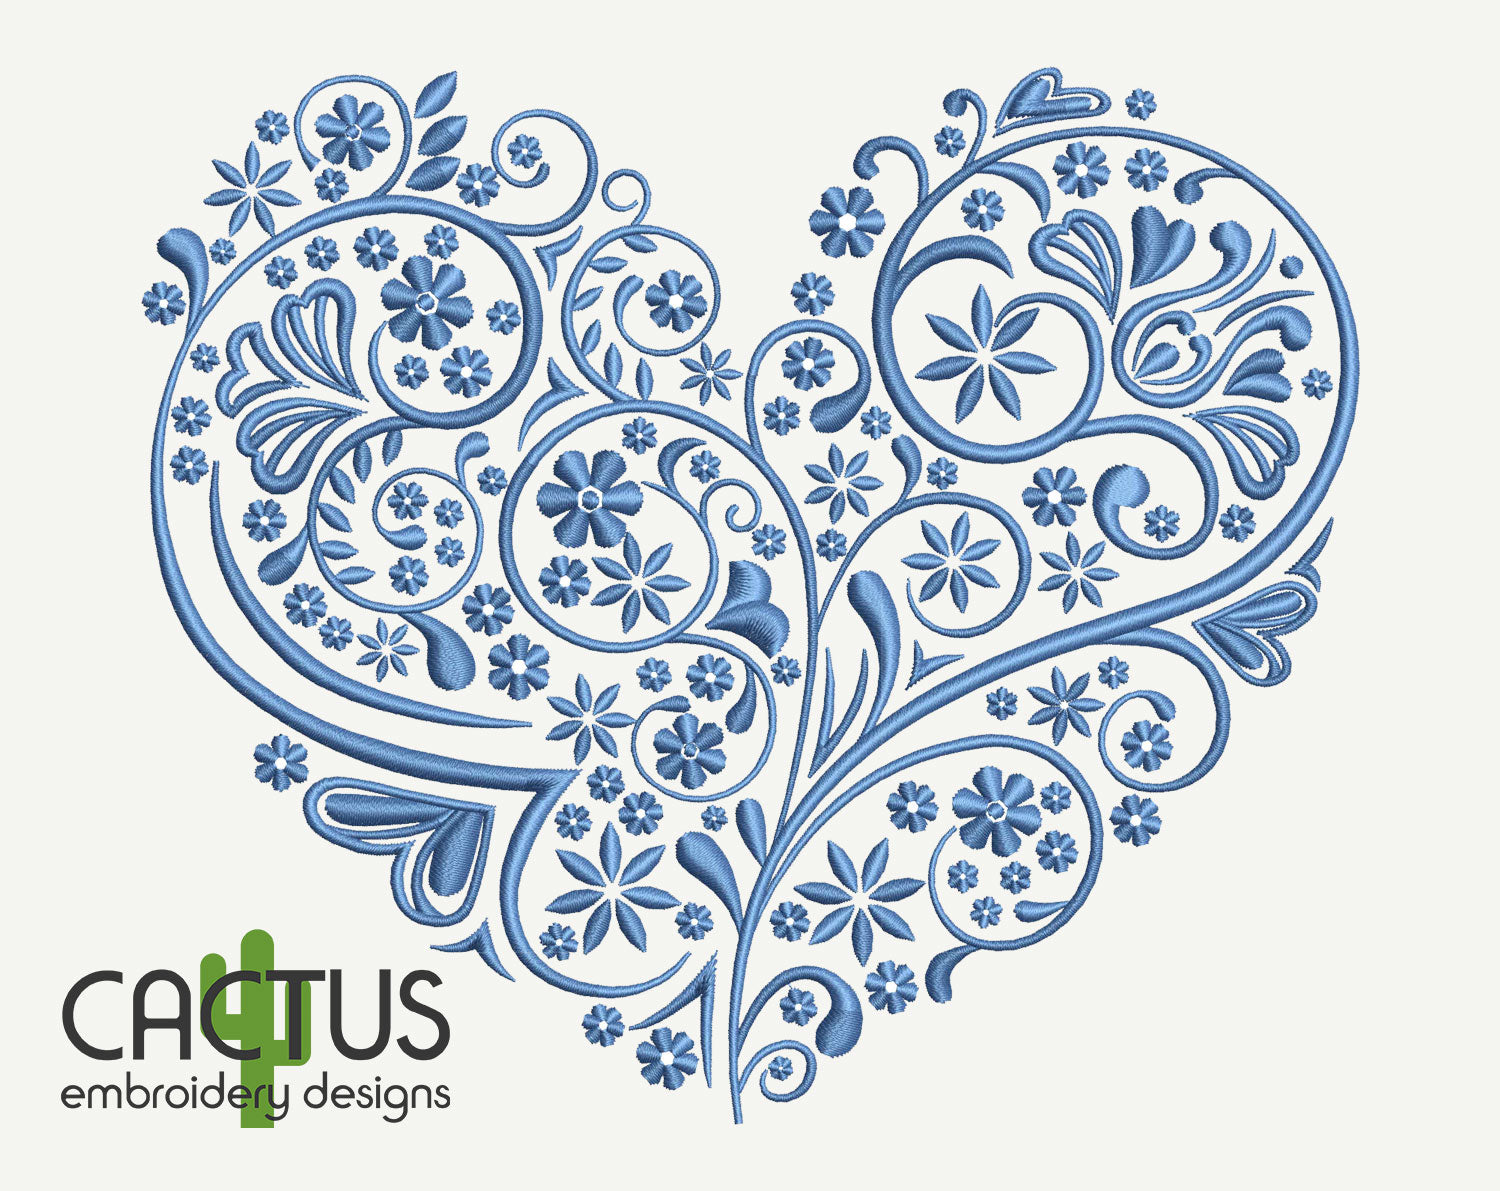 Patterned Heart Embroidery Design – Cactus Embroidery Designs